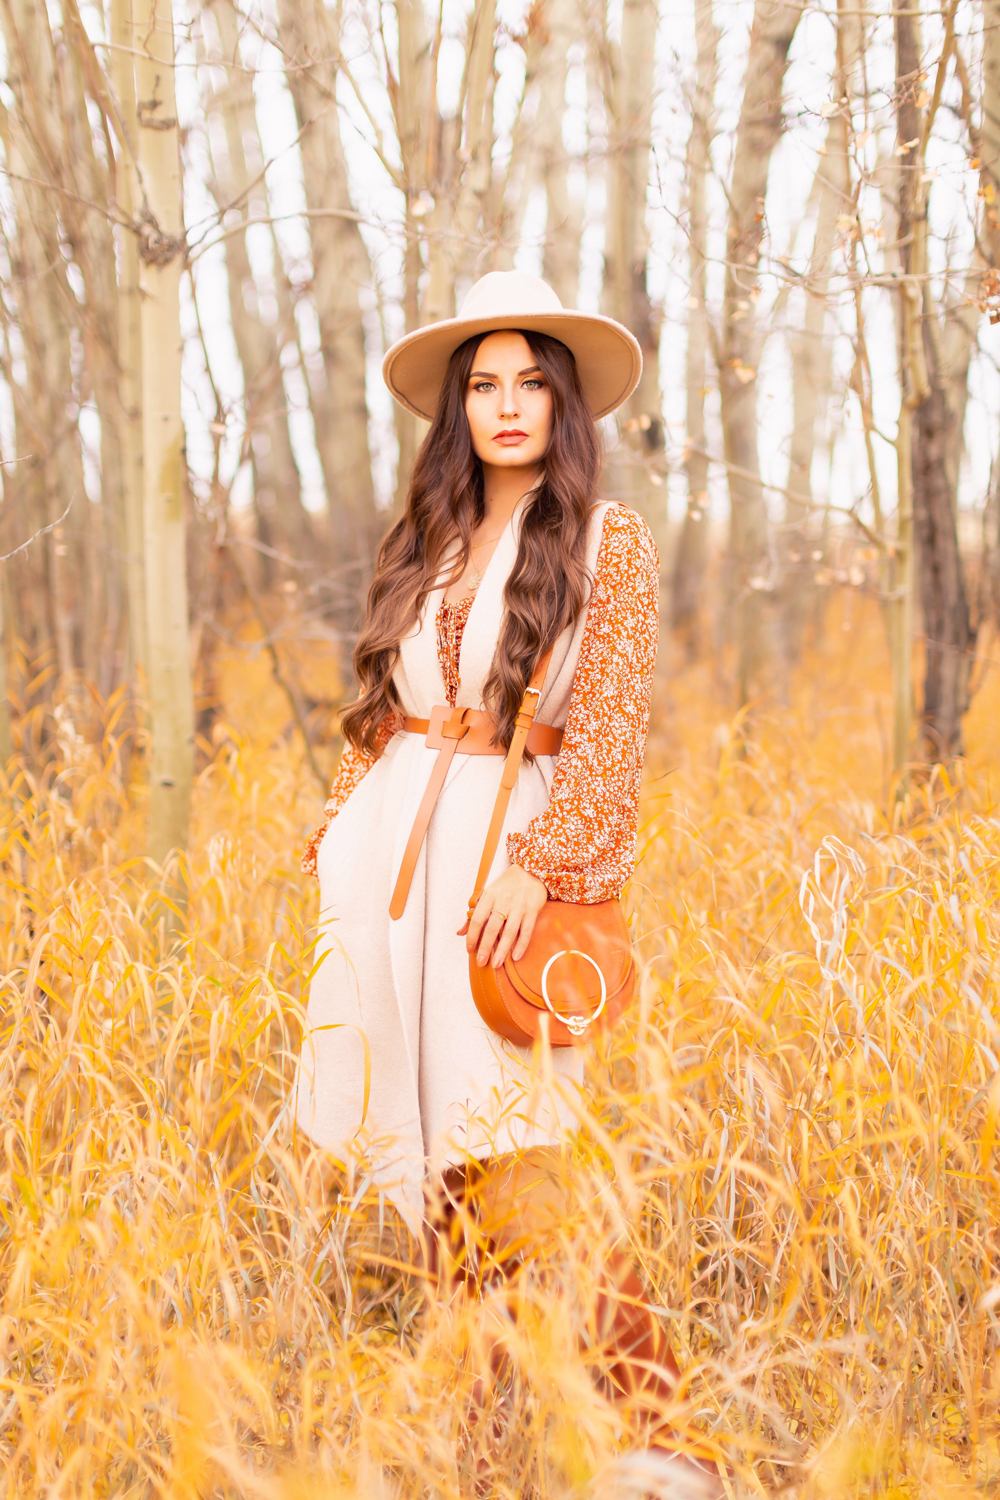 6 Luxe Bohemian Fall Outfits | Rancher Revival | Brunette woman wearing an orange floral mini dress, beige Pink Martini Stockport Vest, wide cognac waist belt with tie detail, a crossbody cognac suede saddle bag and Lucky Brand Whiskey Azoola Leather Boot amoungst golden grasses and bare trees | Boho Fall 2022 Outfit Ideas | Classic Fall Outfit Formulas | Feminine Bohemian Style | Bohemian Outfit Ideas | How to Style a Rancher Hat | Calgary Alberta Fashion Blogger // JustineCelina.com